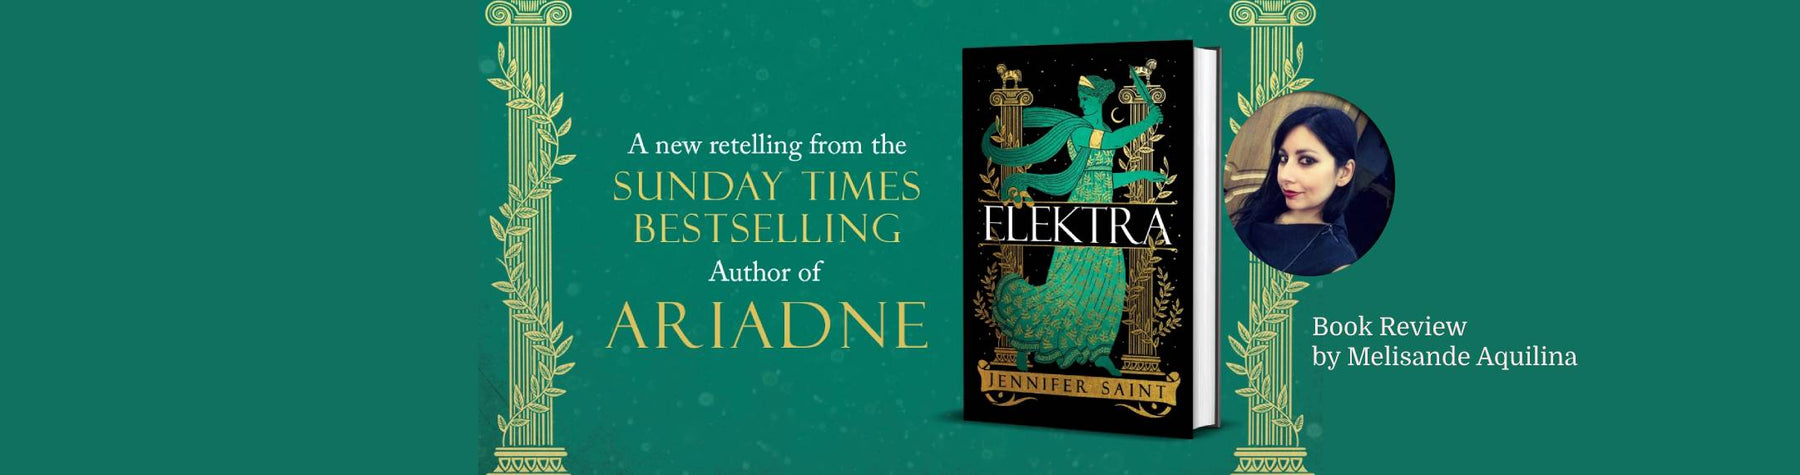 A truly refreshing and intriguing book : Read our review of Elektra by Melisande Aquilina